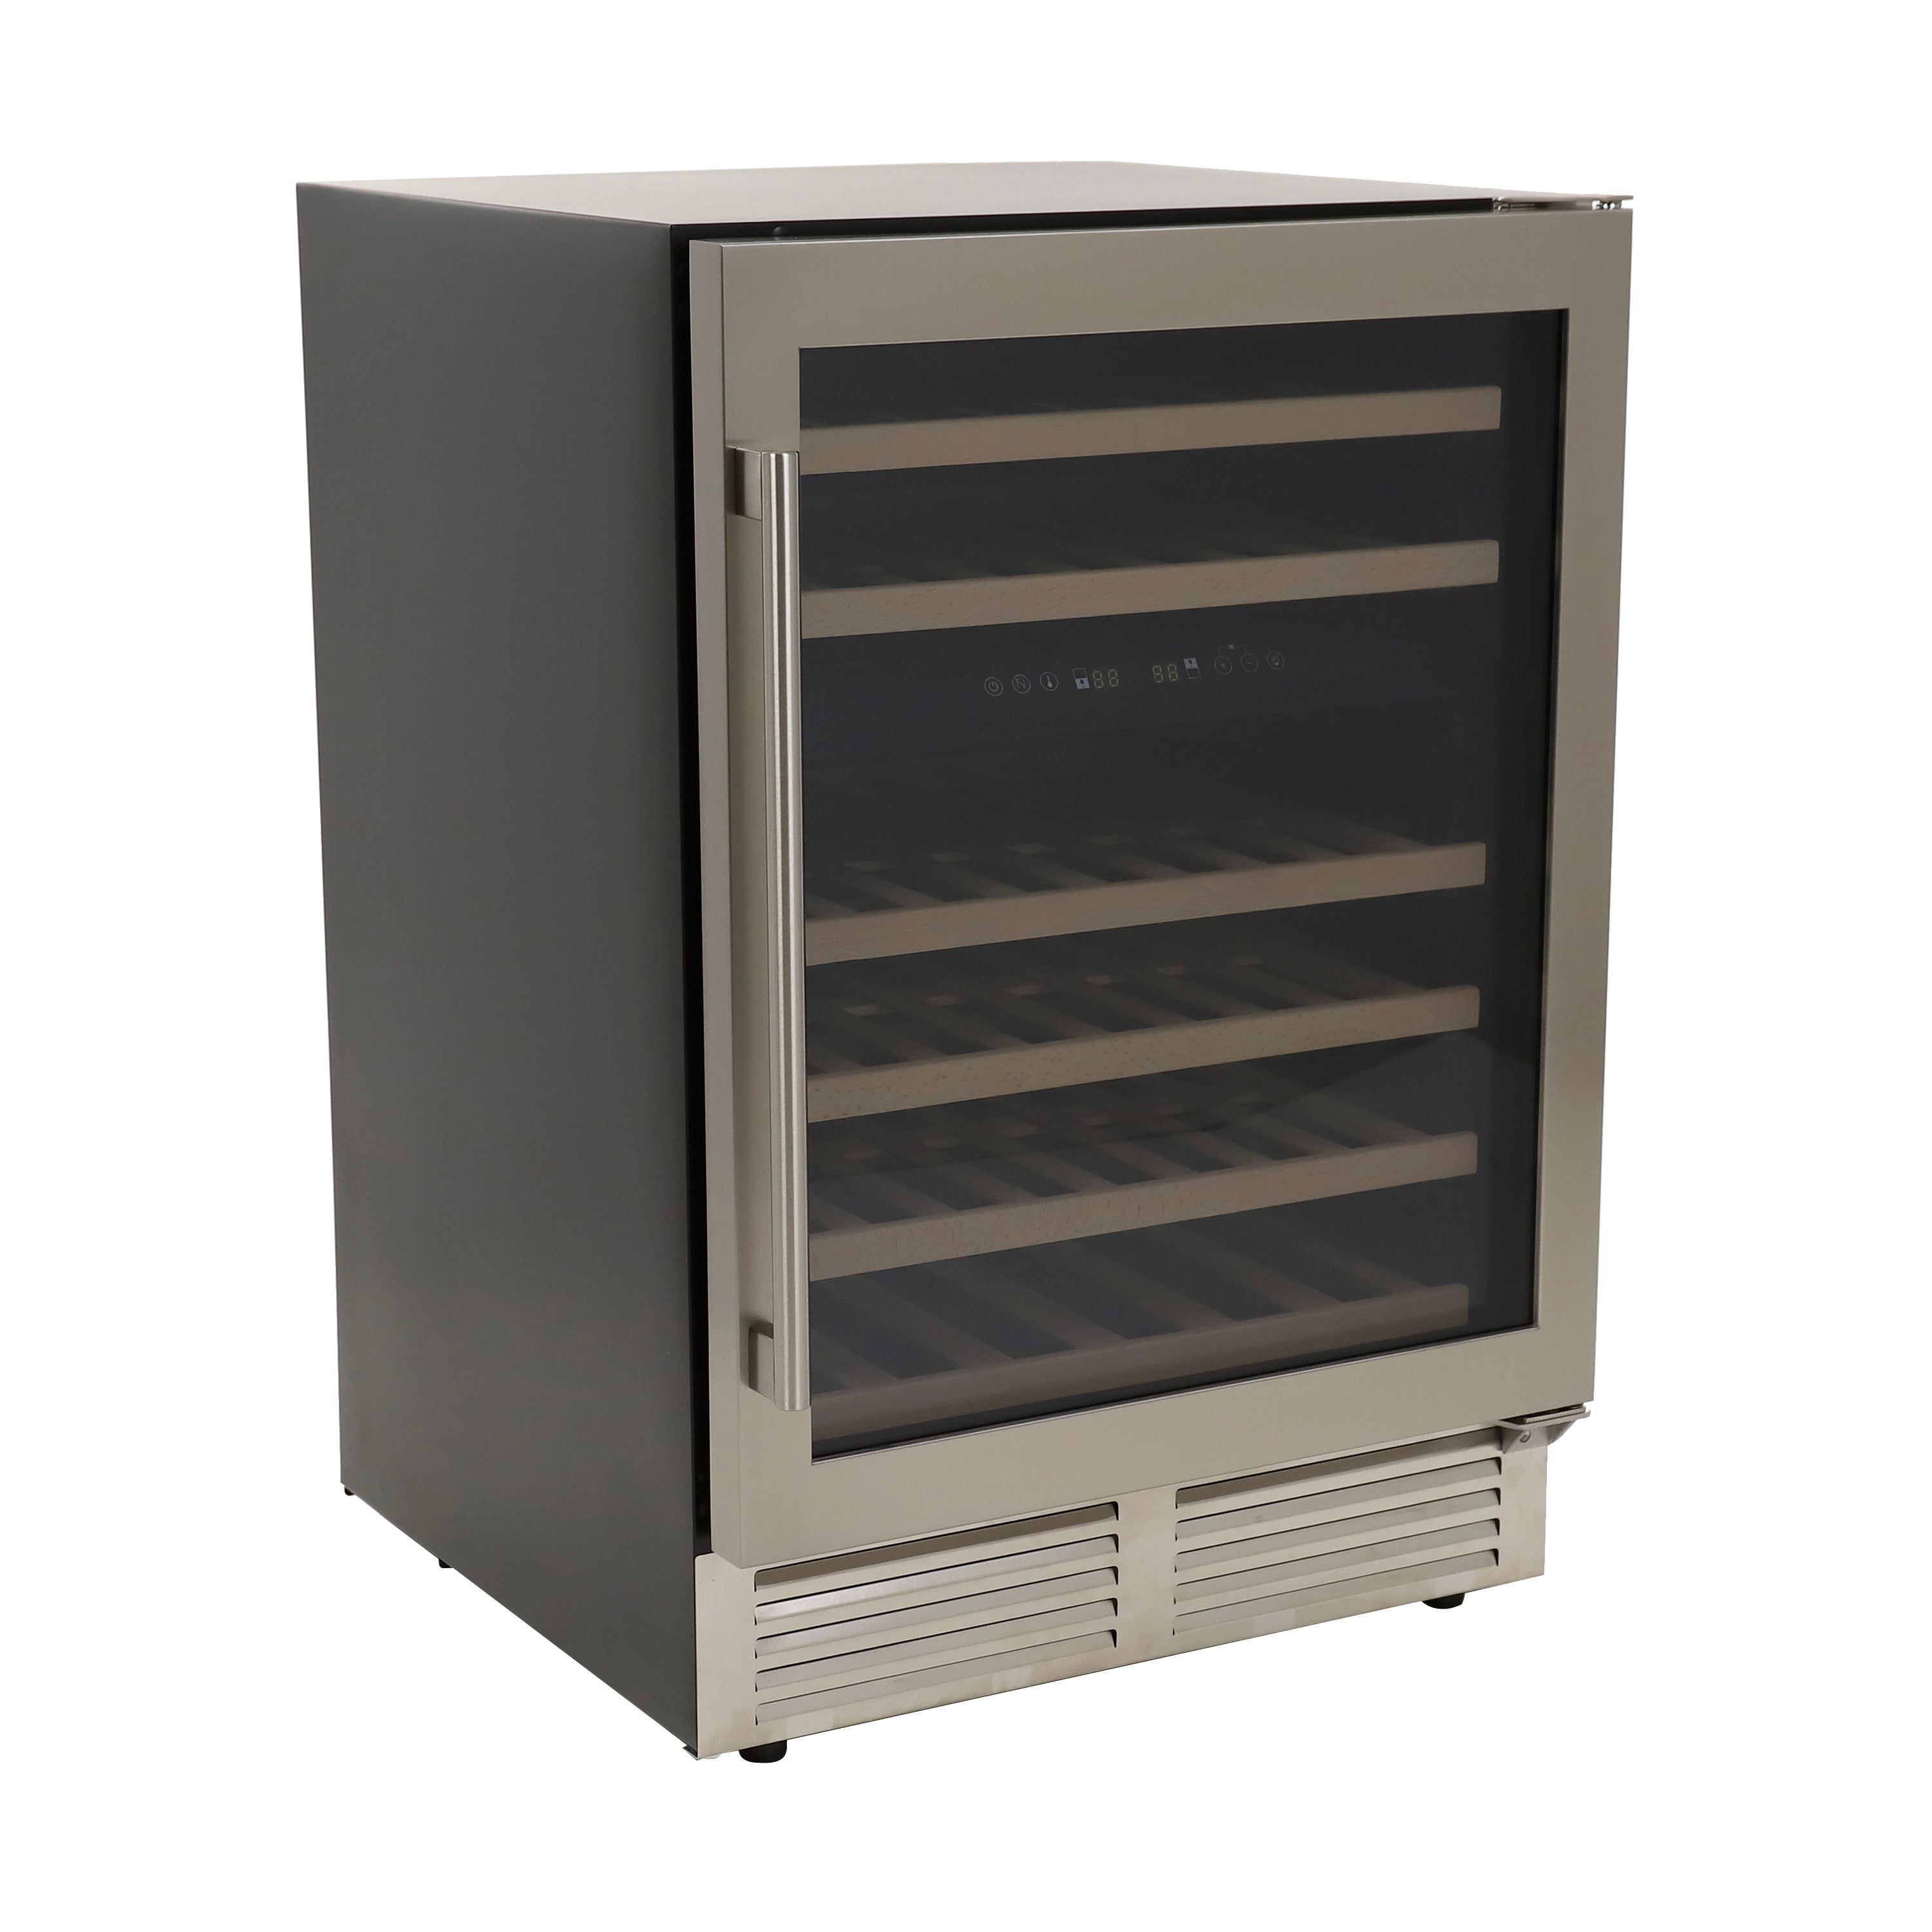 Avanti - WCD46DZ3S,  Dual-Zone Wine Cooler, 46 Bottle Capacity, in Stainless Steel with Wood Accent Shelving